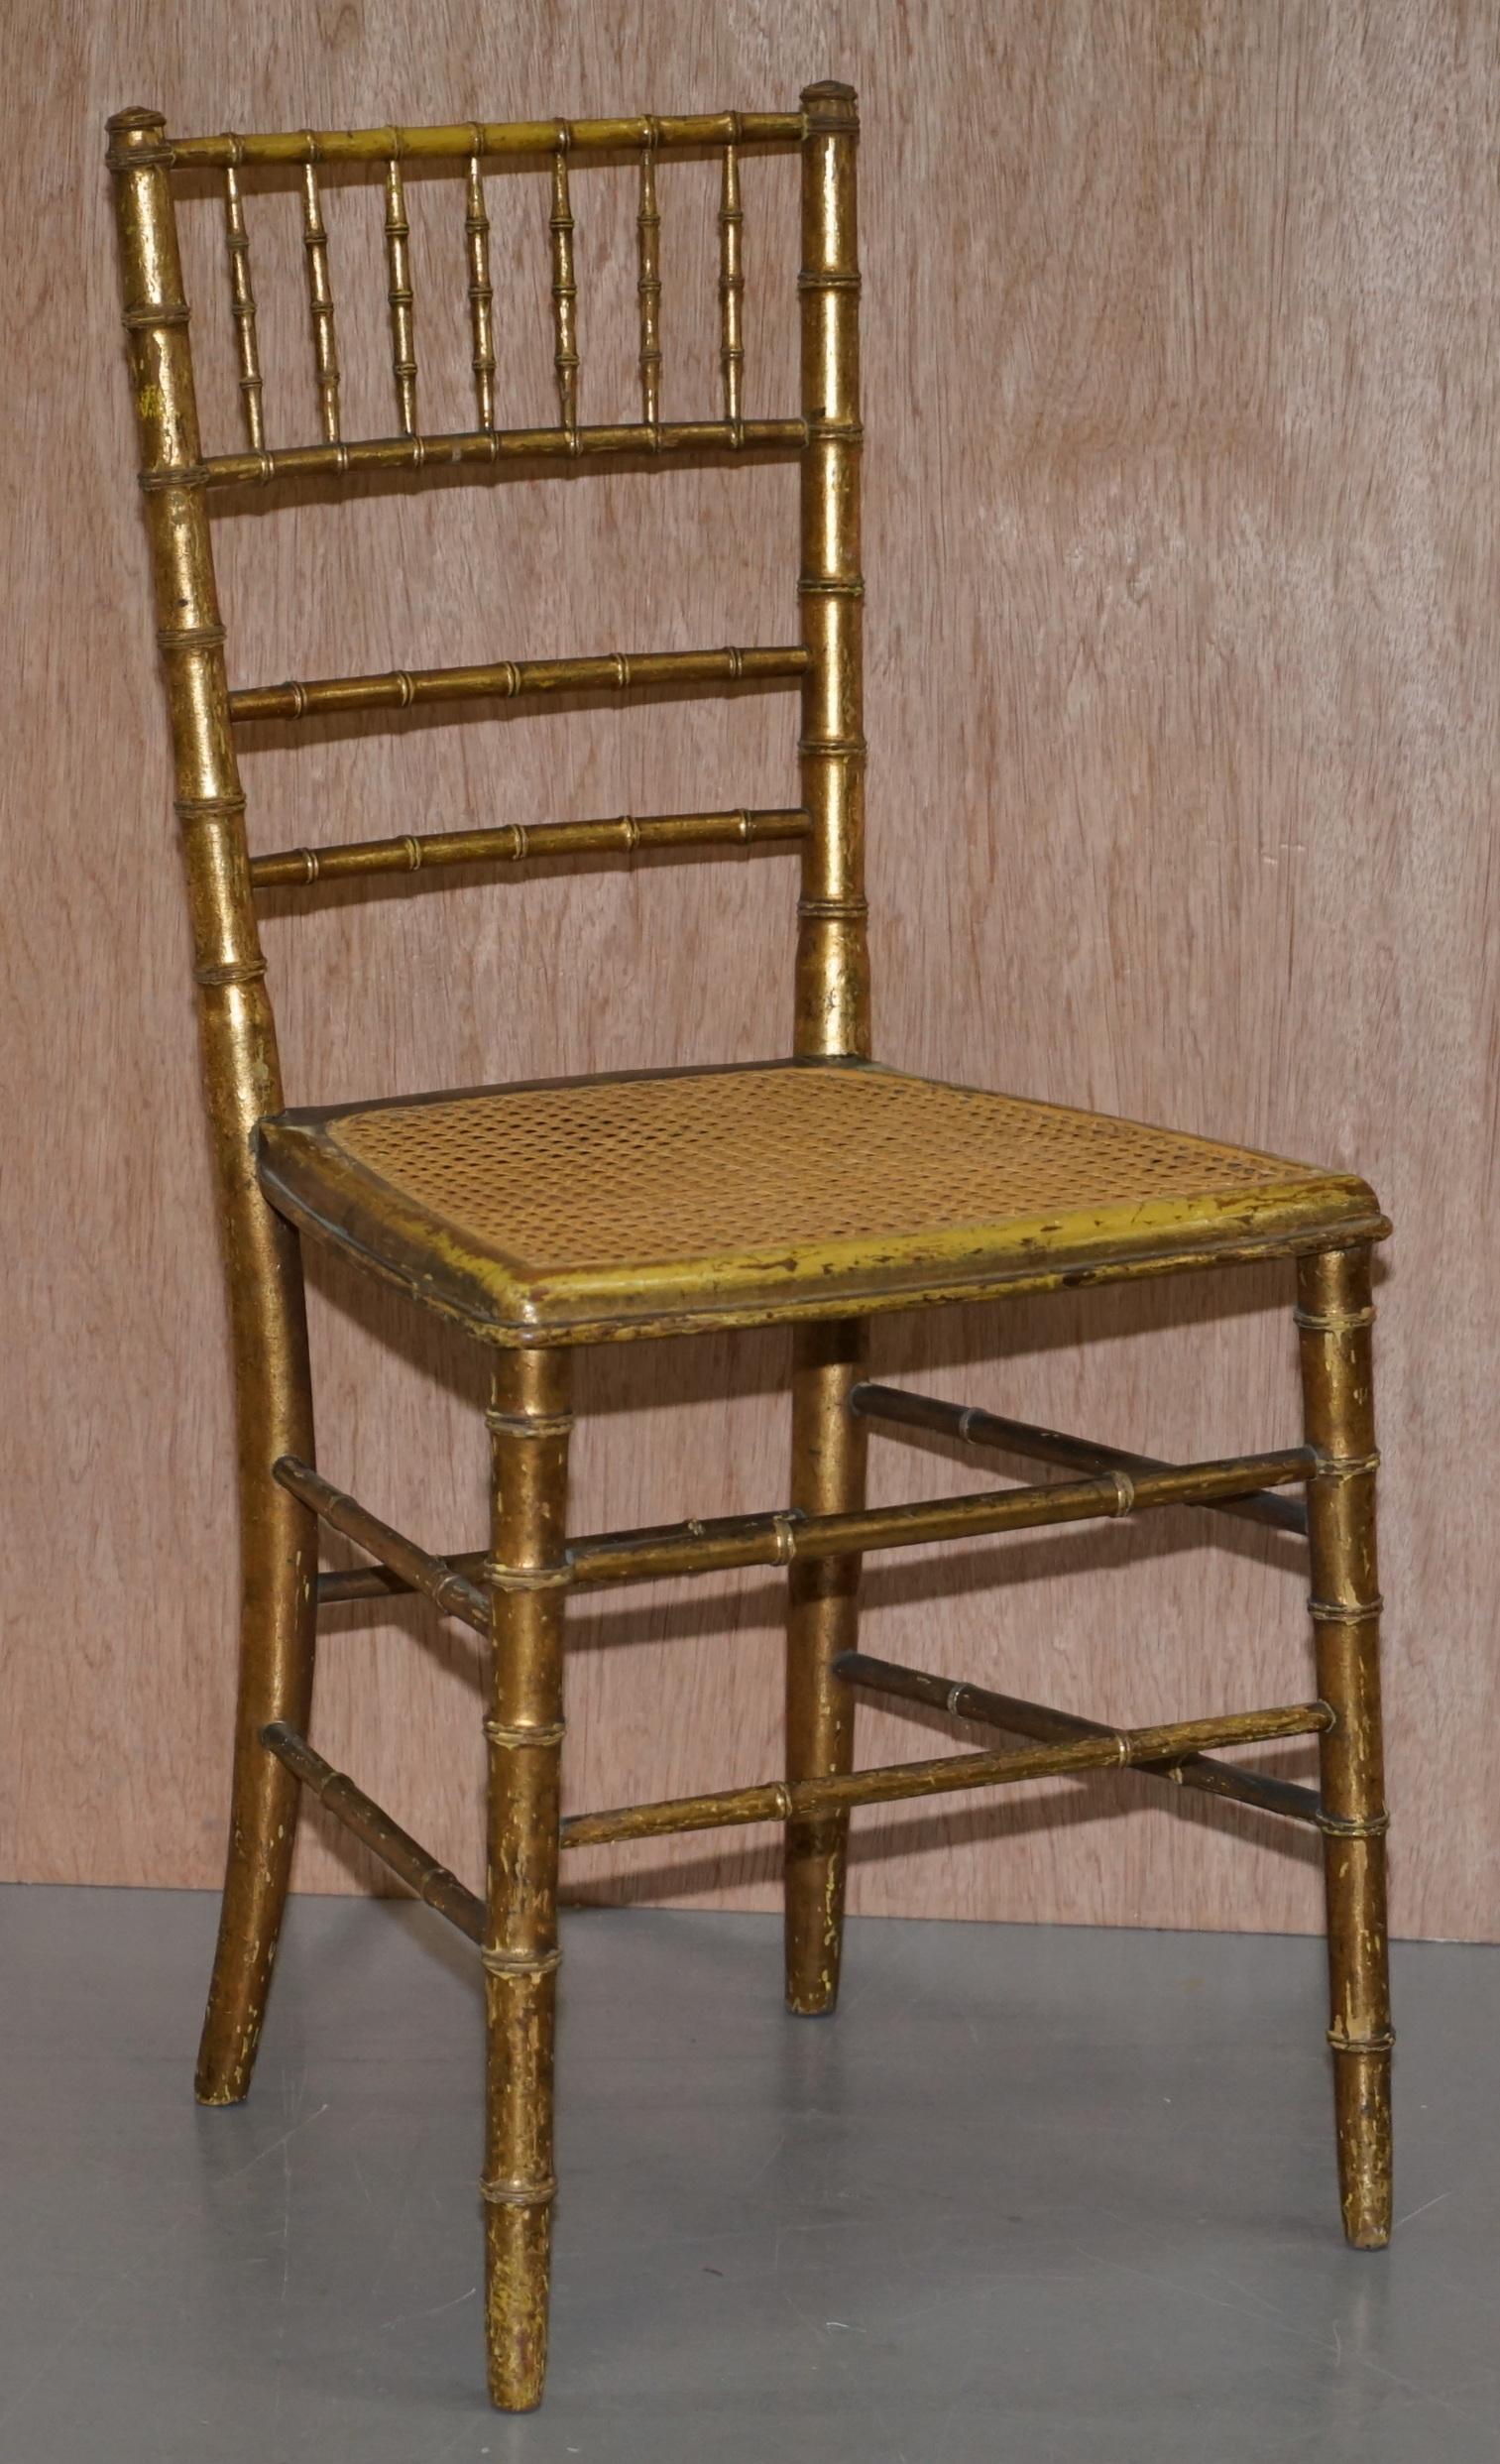 We are delighted to offer for sale this lovely pair of original Regency circa 1810 giltwood famboo chairs

A very good looking and collectable pair of occasional chairs. These have the original and now distressed giltwood finish, the frames are